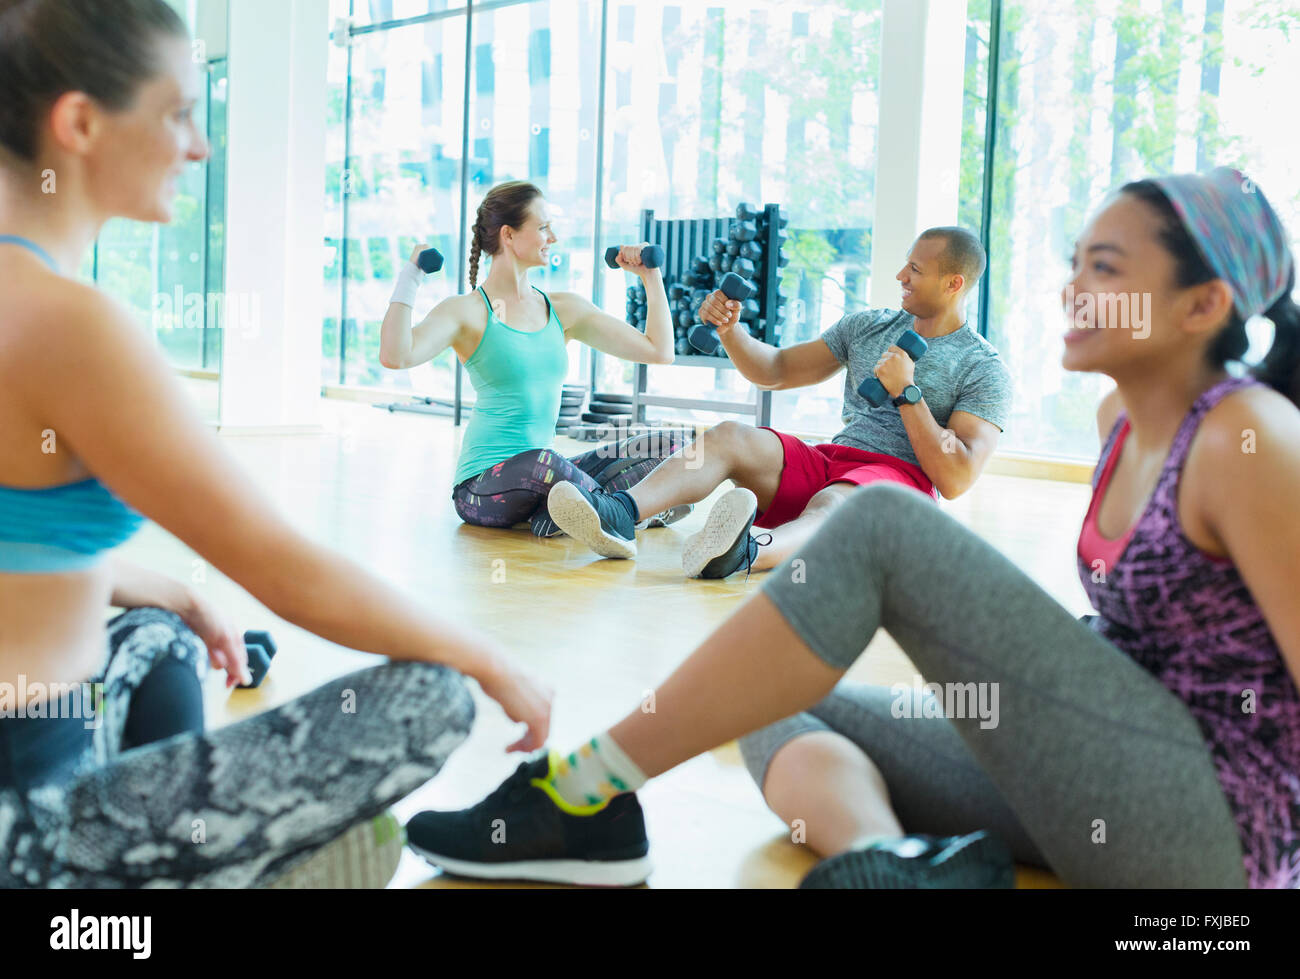 Women talking and resting at gym Stock Photo